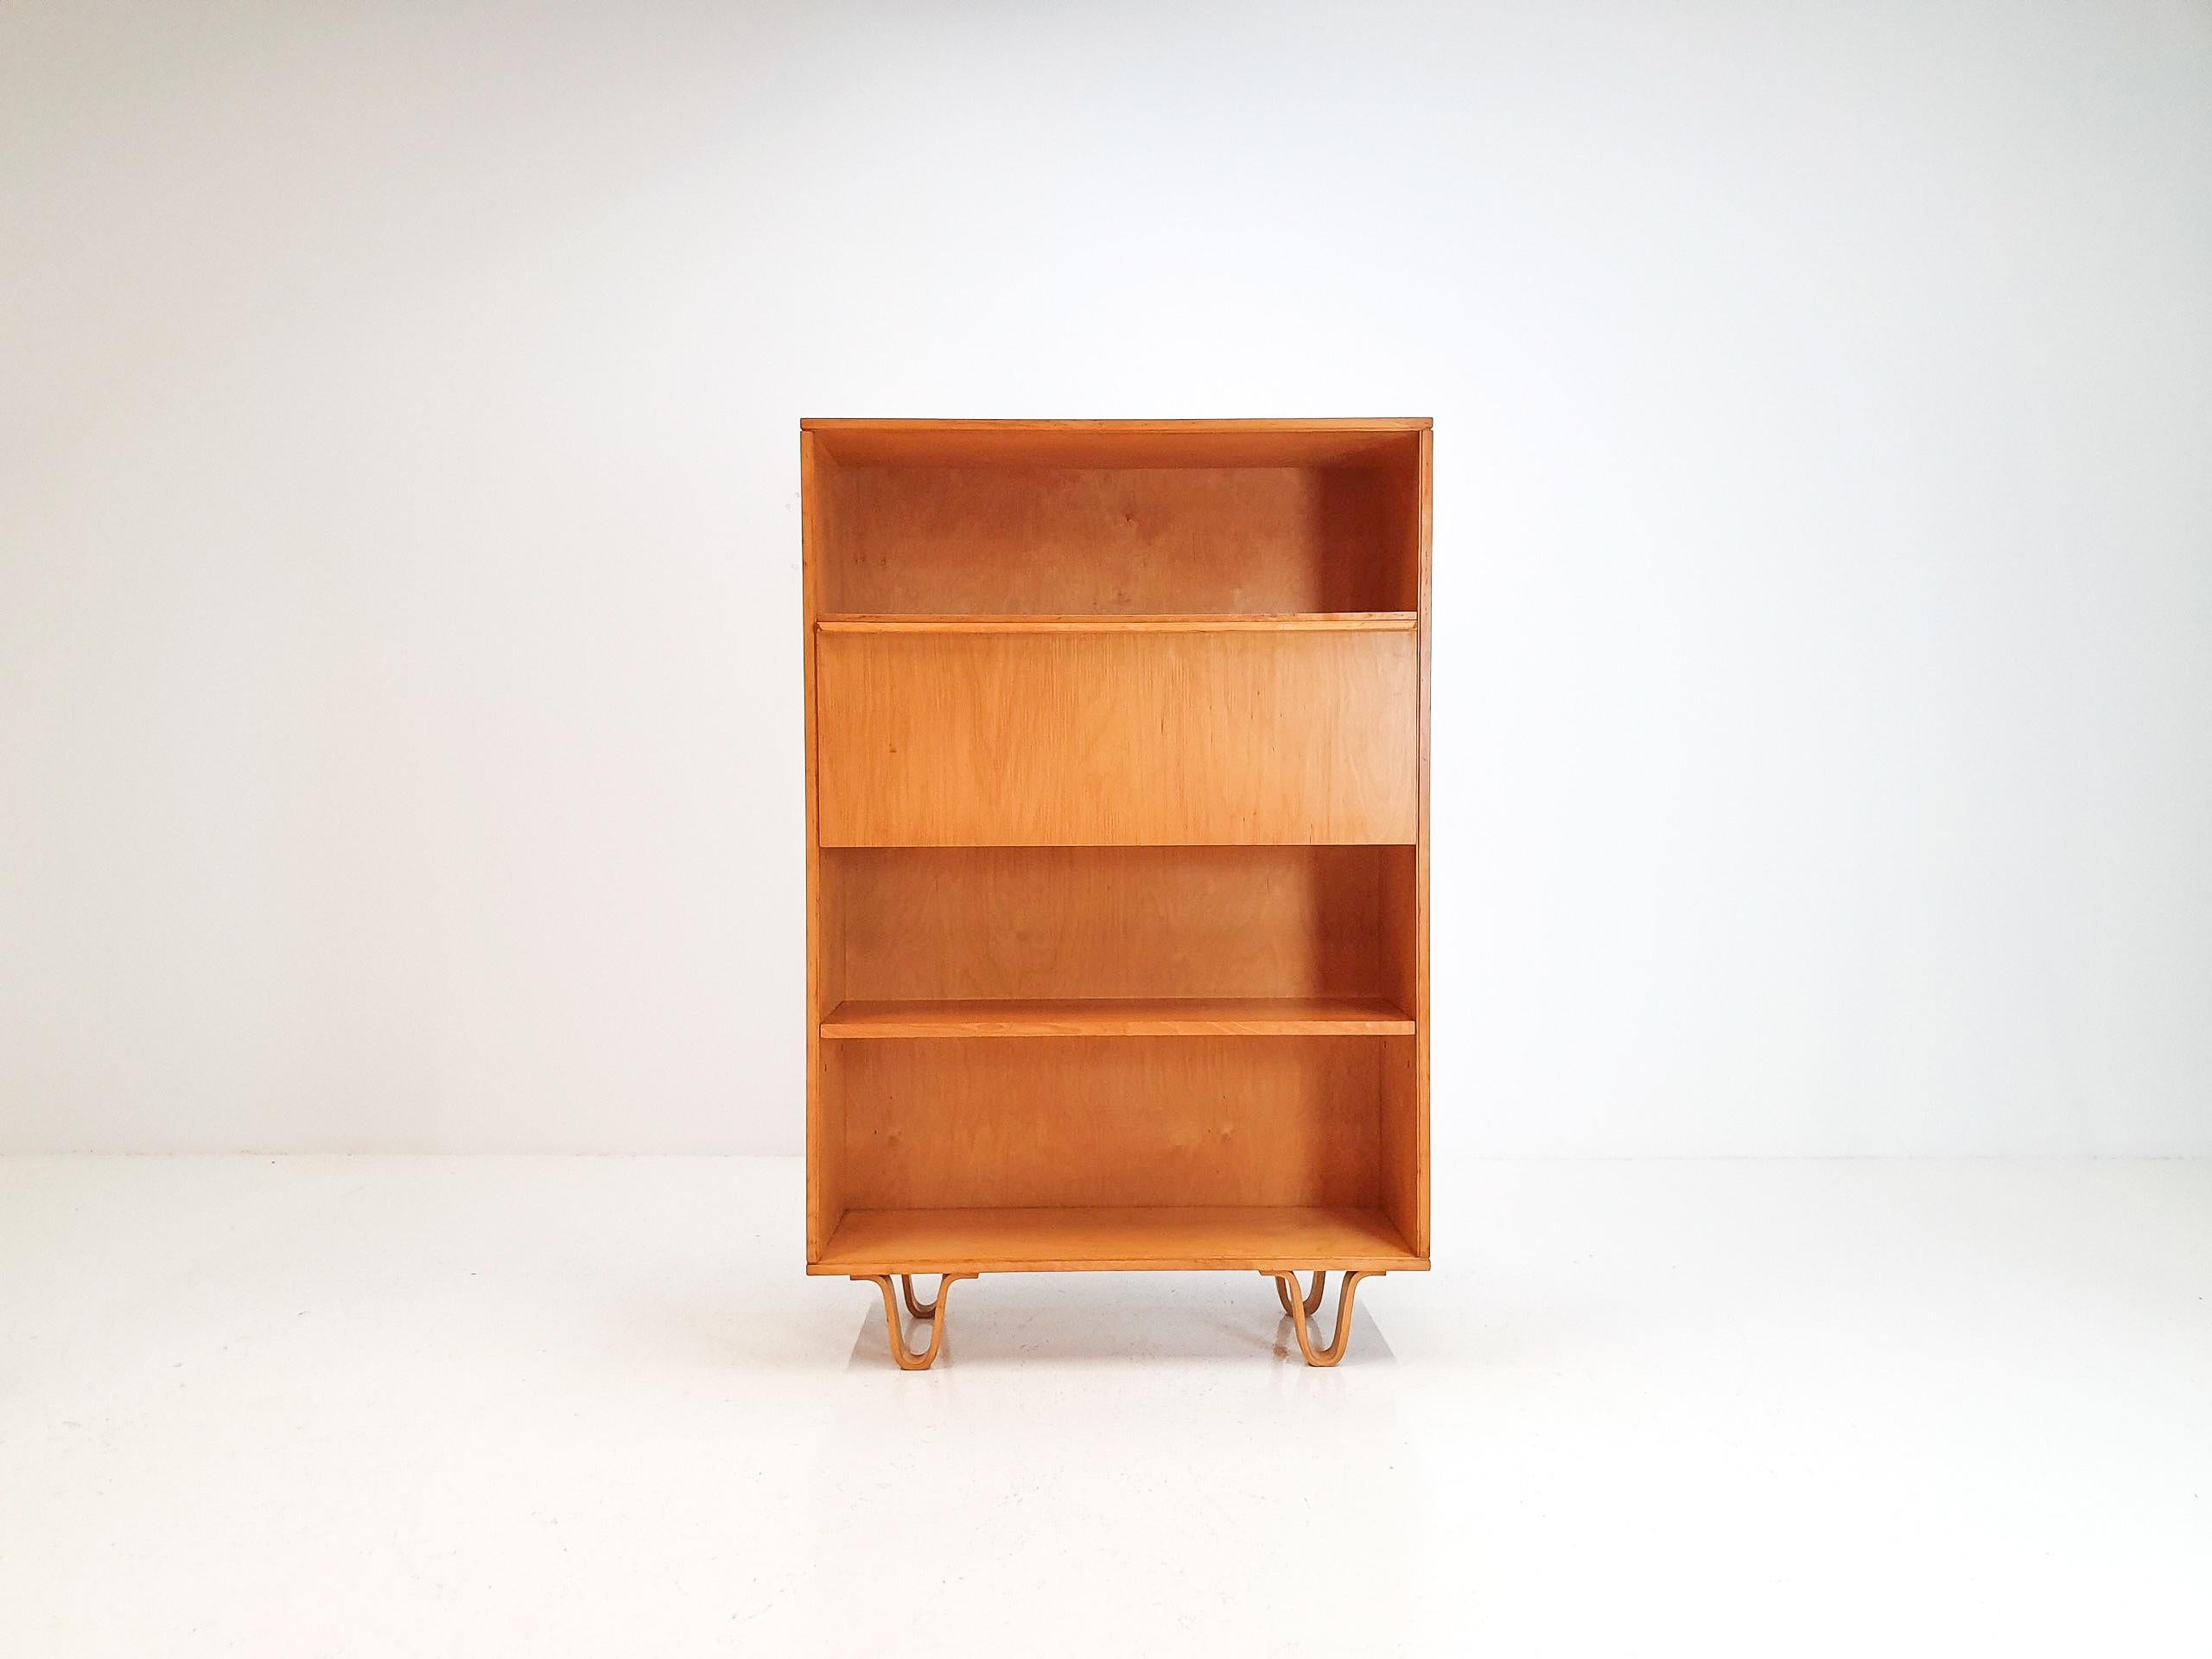 A Cees Braakman BB04 Birch Secretaire for UMS Pastoe, Designed 1952, Netherlands

A Cees Braakman designed BB04 birch bookcase and writing desk, part of the Combex range. Consisting of shelving, a folding down desk shelf and internally a white